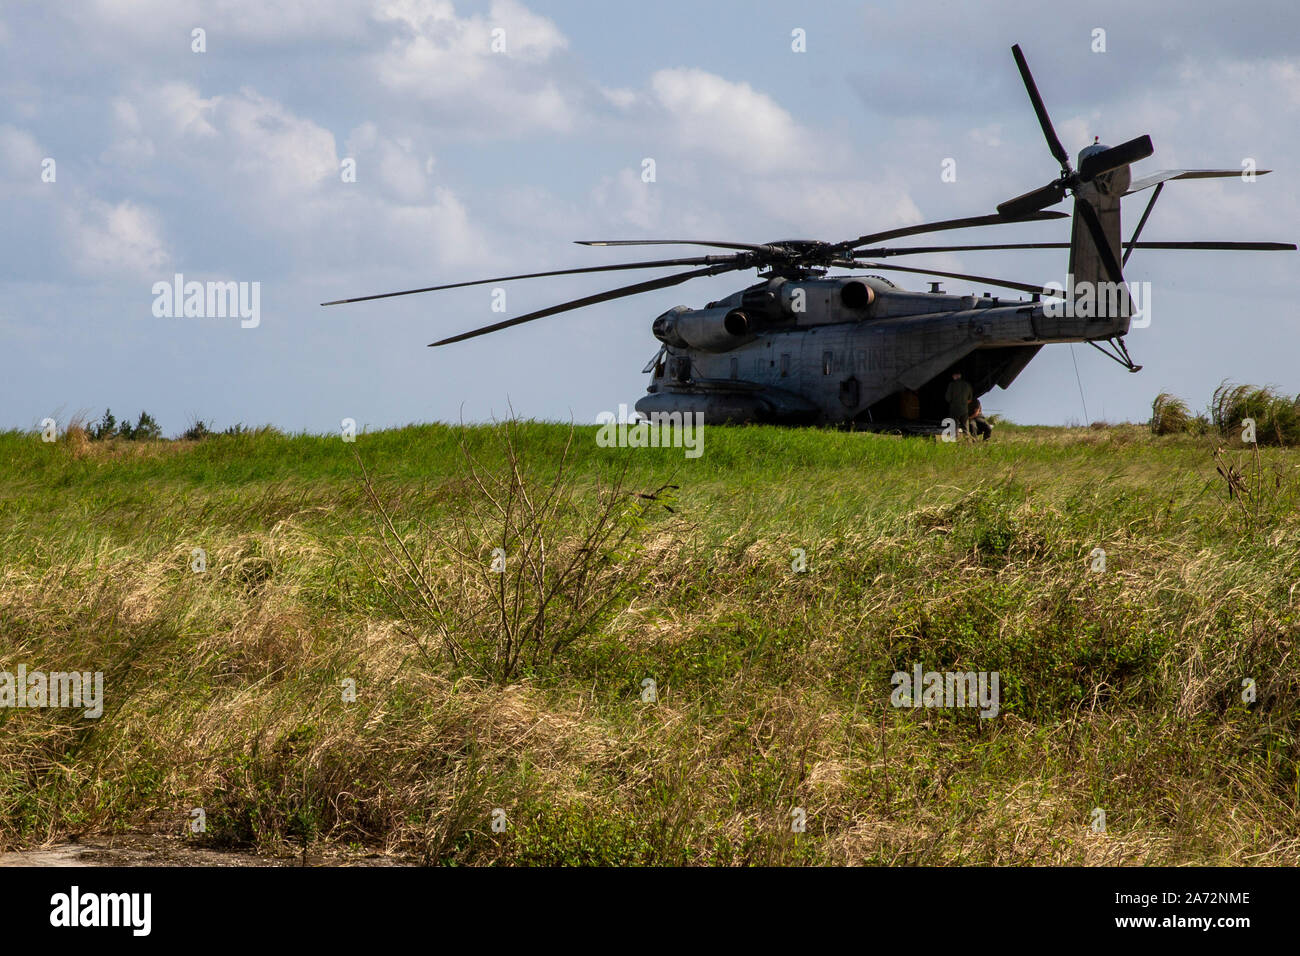 A CH-53E Super Stallion helicopter sits in a field during a rapid deployment exercise conducted by 1st Marine Aircraft Wing, III Marine Expeditionary Force, Okinawa, Japan, Oct. 25, 2019. As the only forward deployed MEF, III MEF is strategically postured to quickly and effectively respond to any crisis using austere, expeditionary bases and established airfields within the Indo-Pacific region. (U.S. Marine Corps photo by Lance Cpl. Tanner D. Lambert) Stock Photo